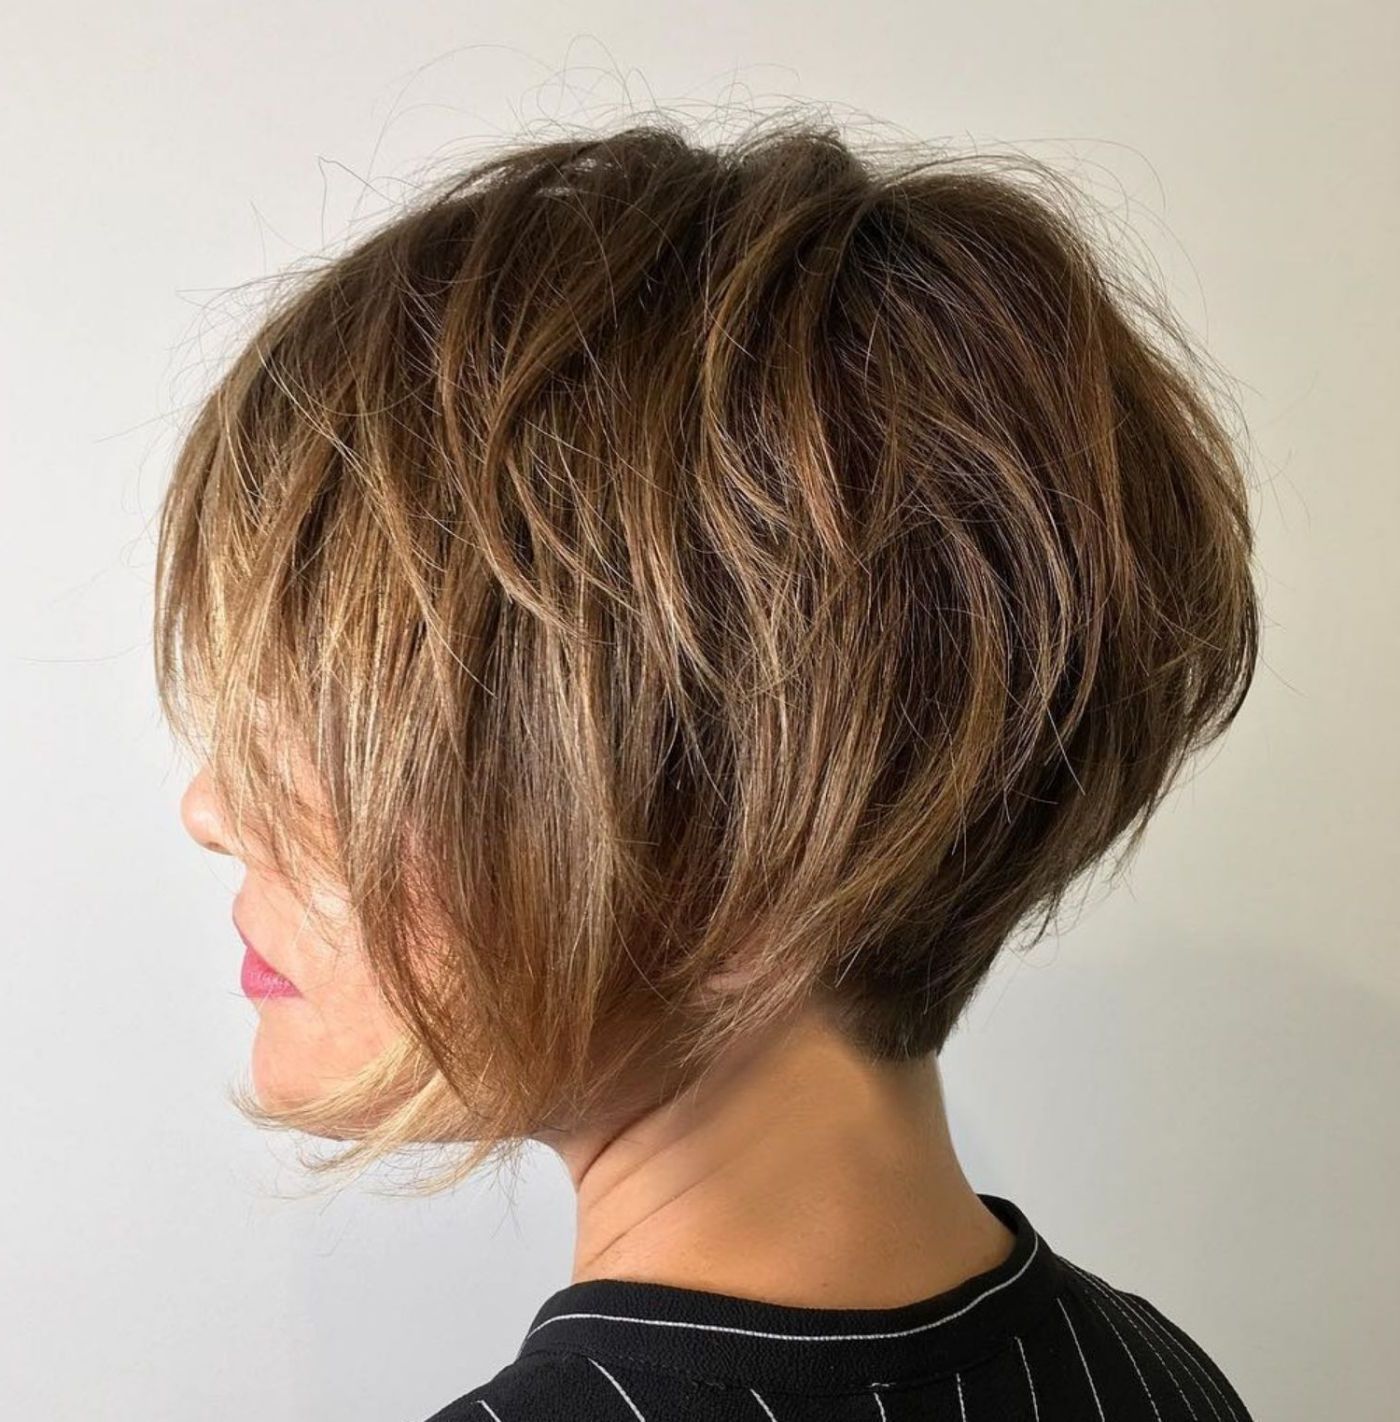 Pixie Haircuts For Thick Hair – 50 Ideas Of Ideal Short Haircuts | Pixie  Haircut For Thick Hair, Haircut For Thick Hair, Short Hairstyles For Thick  Hair With Layered Messy Pixie Bob Hairstyles (View 5 of 20)